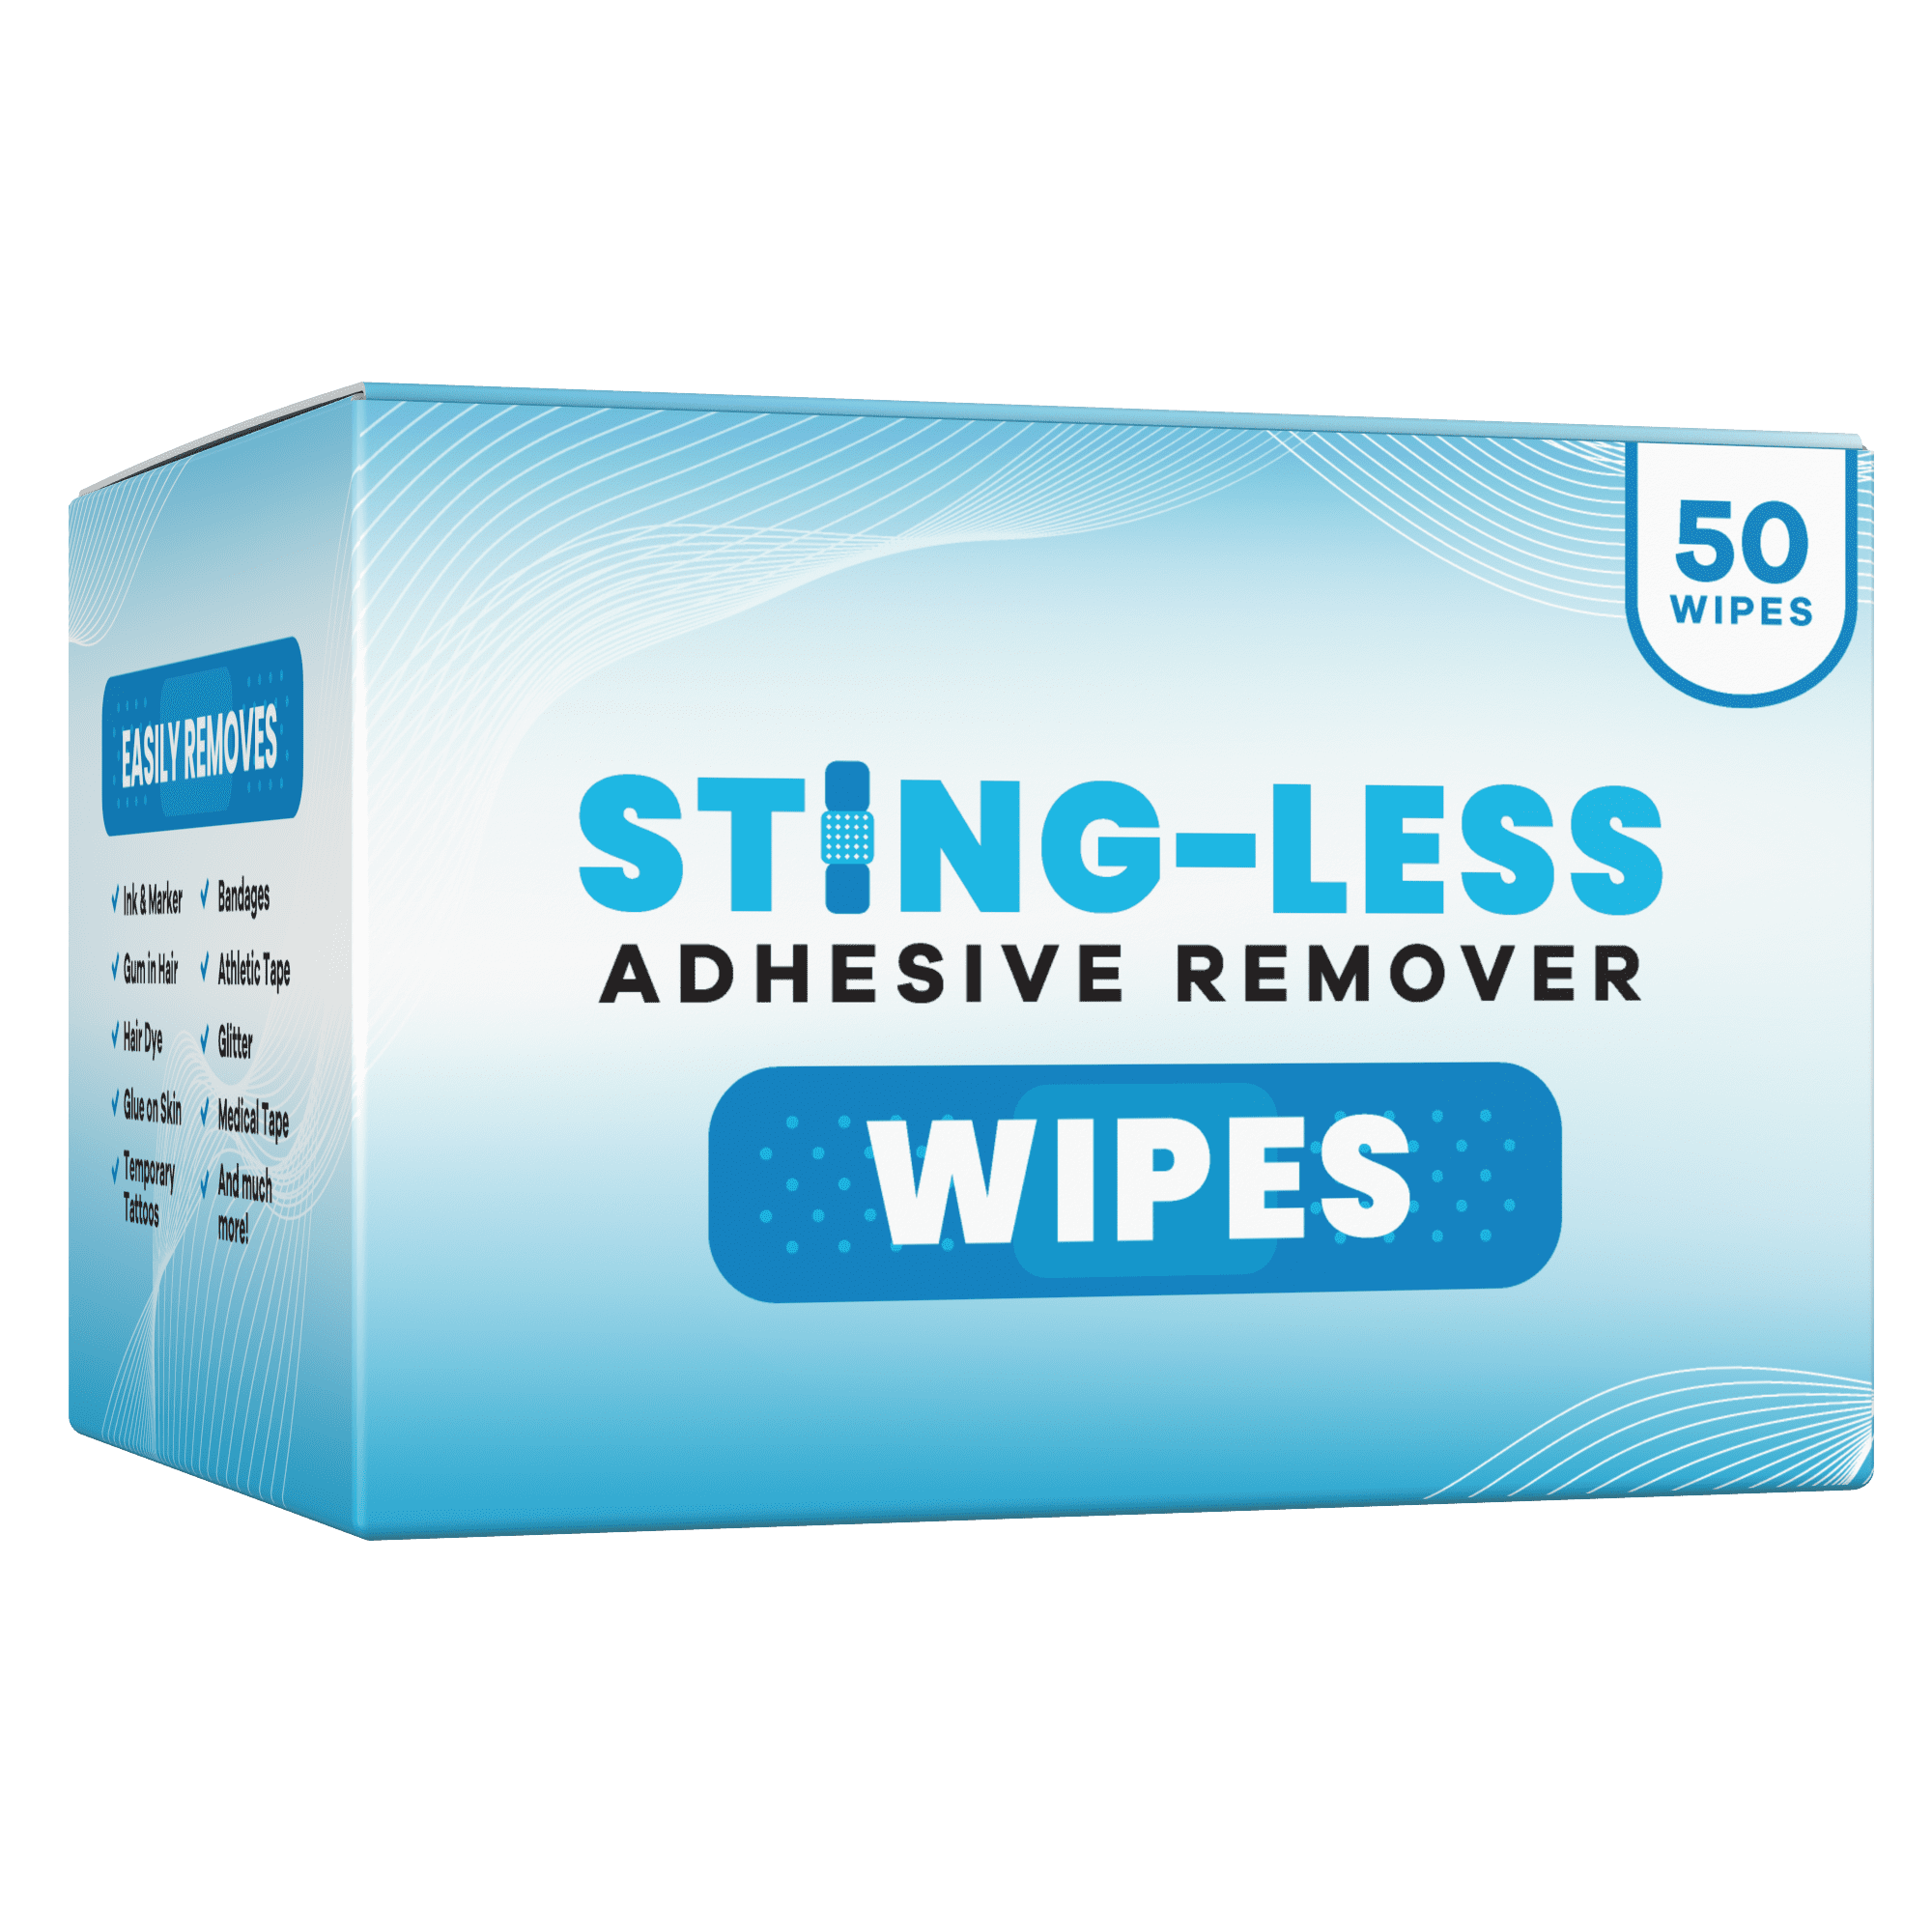 Stingless Adhesive Remover Wipes 50ct, All Natural and Safe on Skin